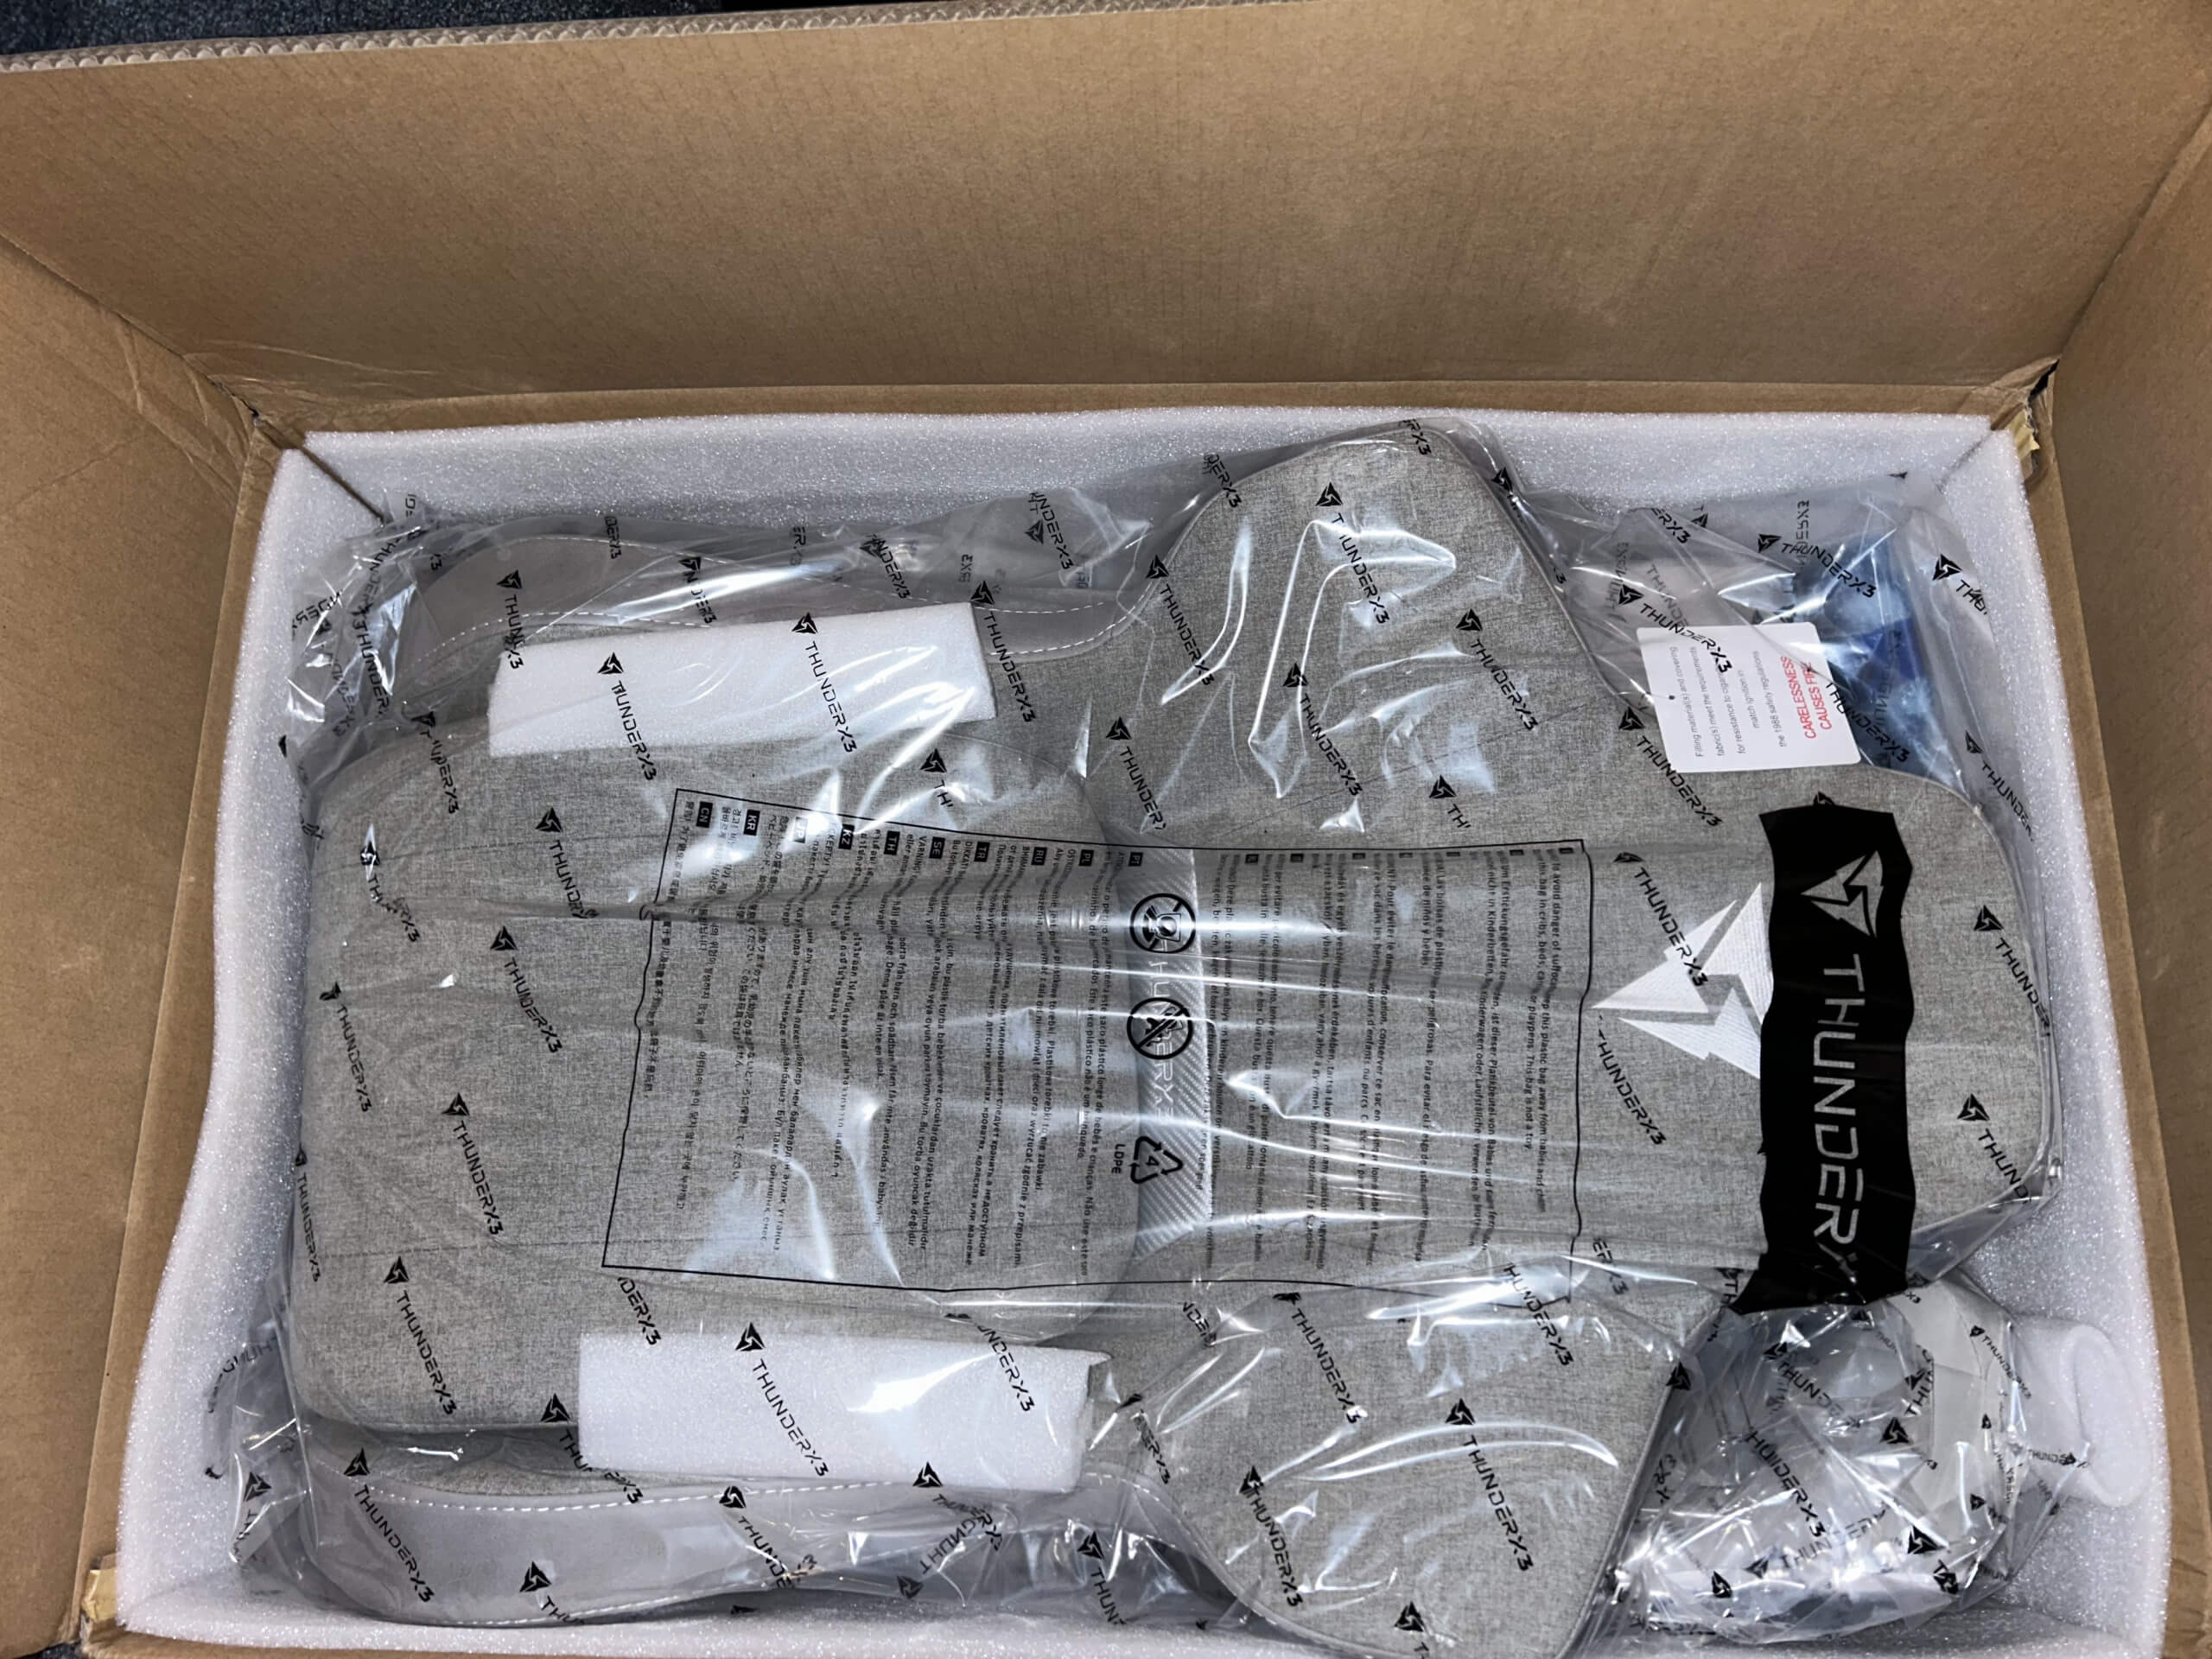 This photograph shows the chair when it was delivered in the boxes. Each piece is wrapped in plastic and bubble wrap. The chair is off a grey fabric colour. 